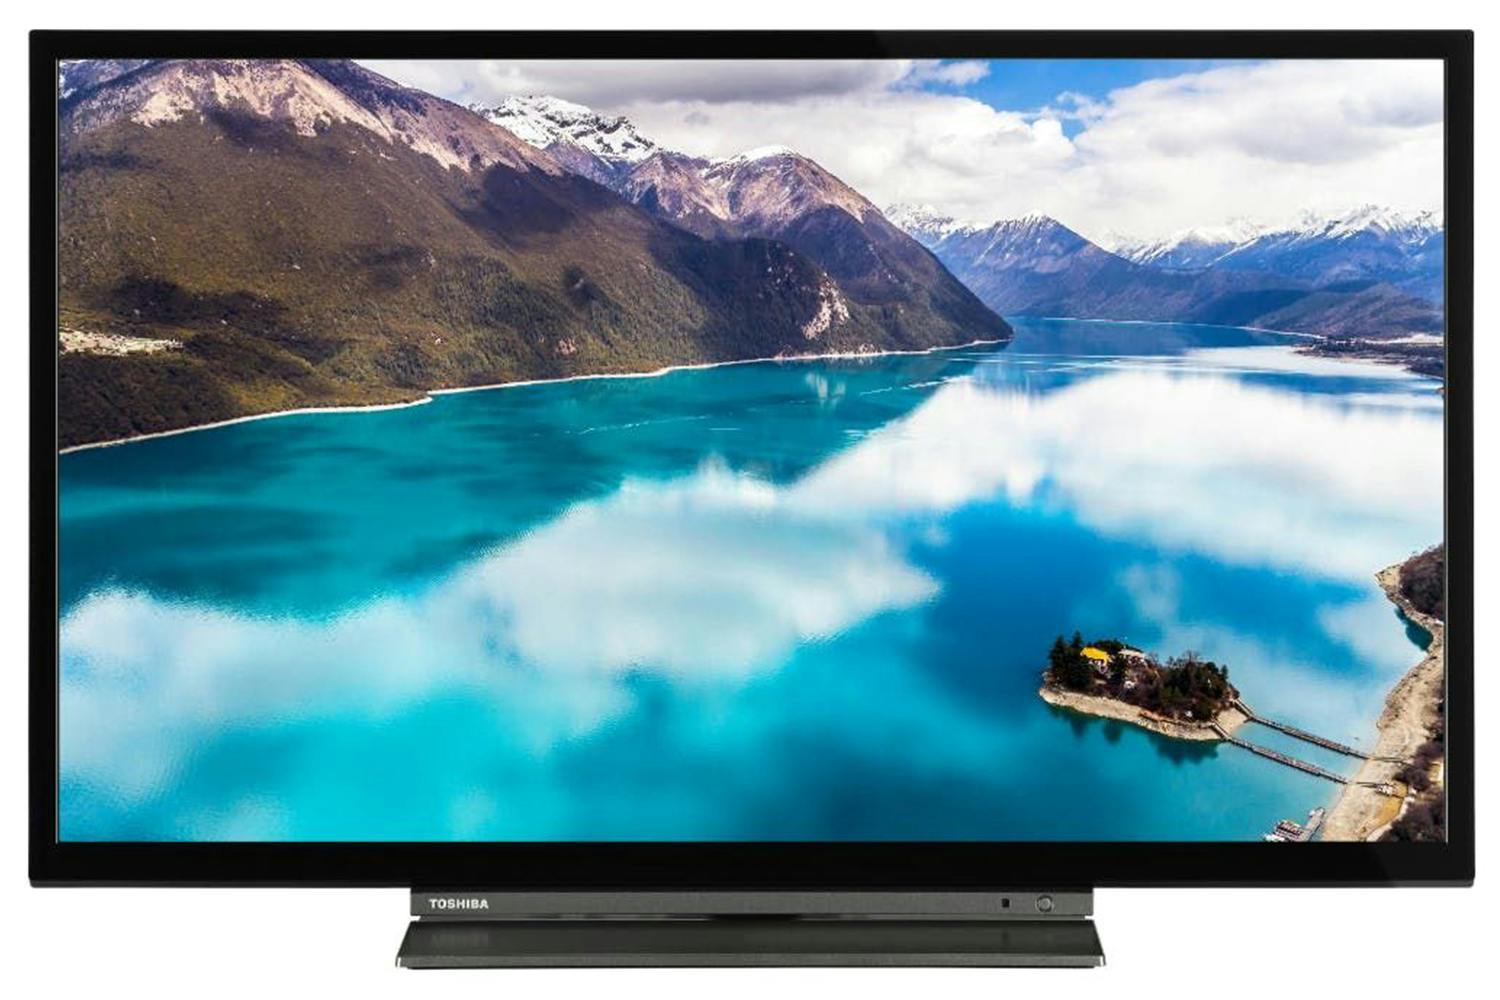 Toshiba 24" HDR Smart TV with Sat Tuner | 24W3163DB